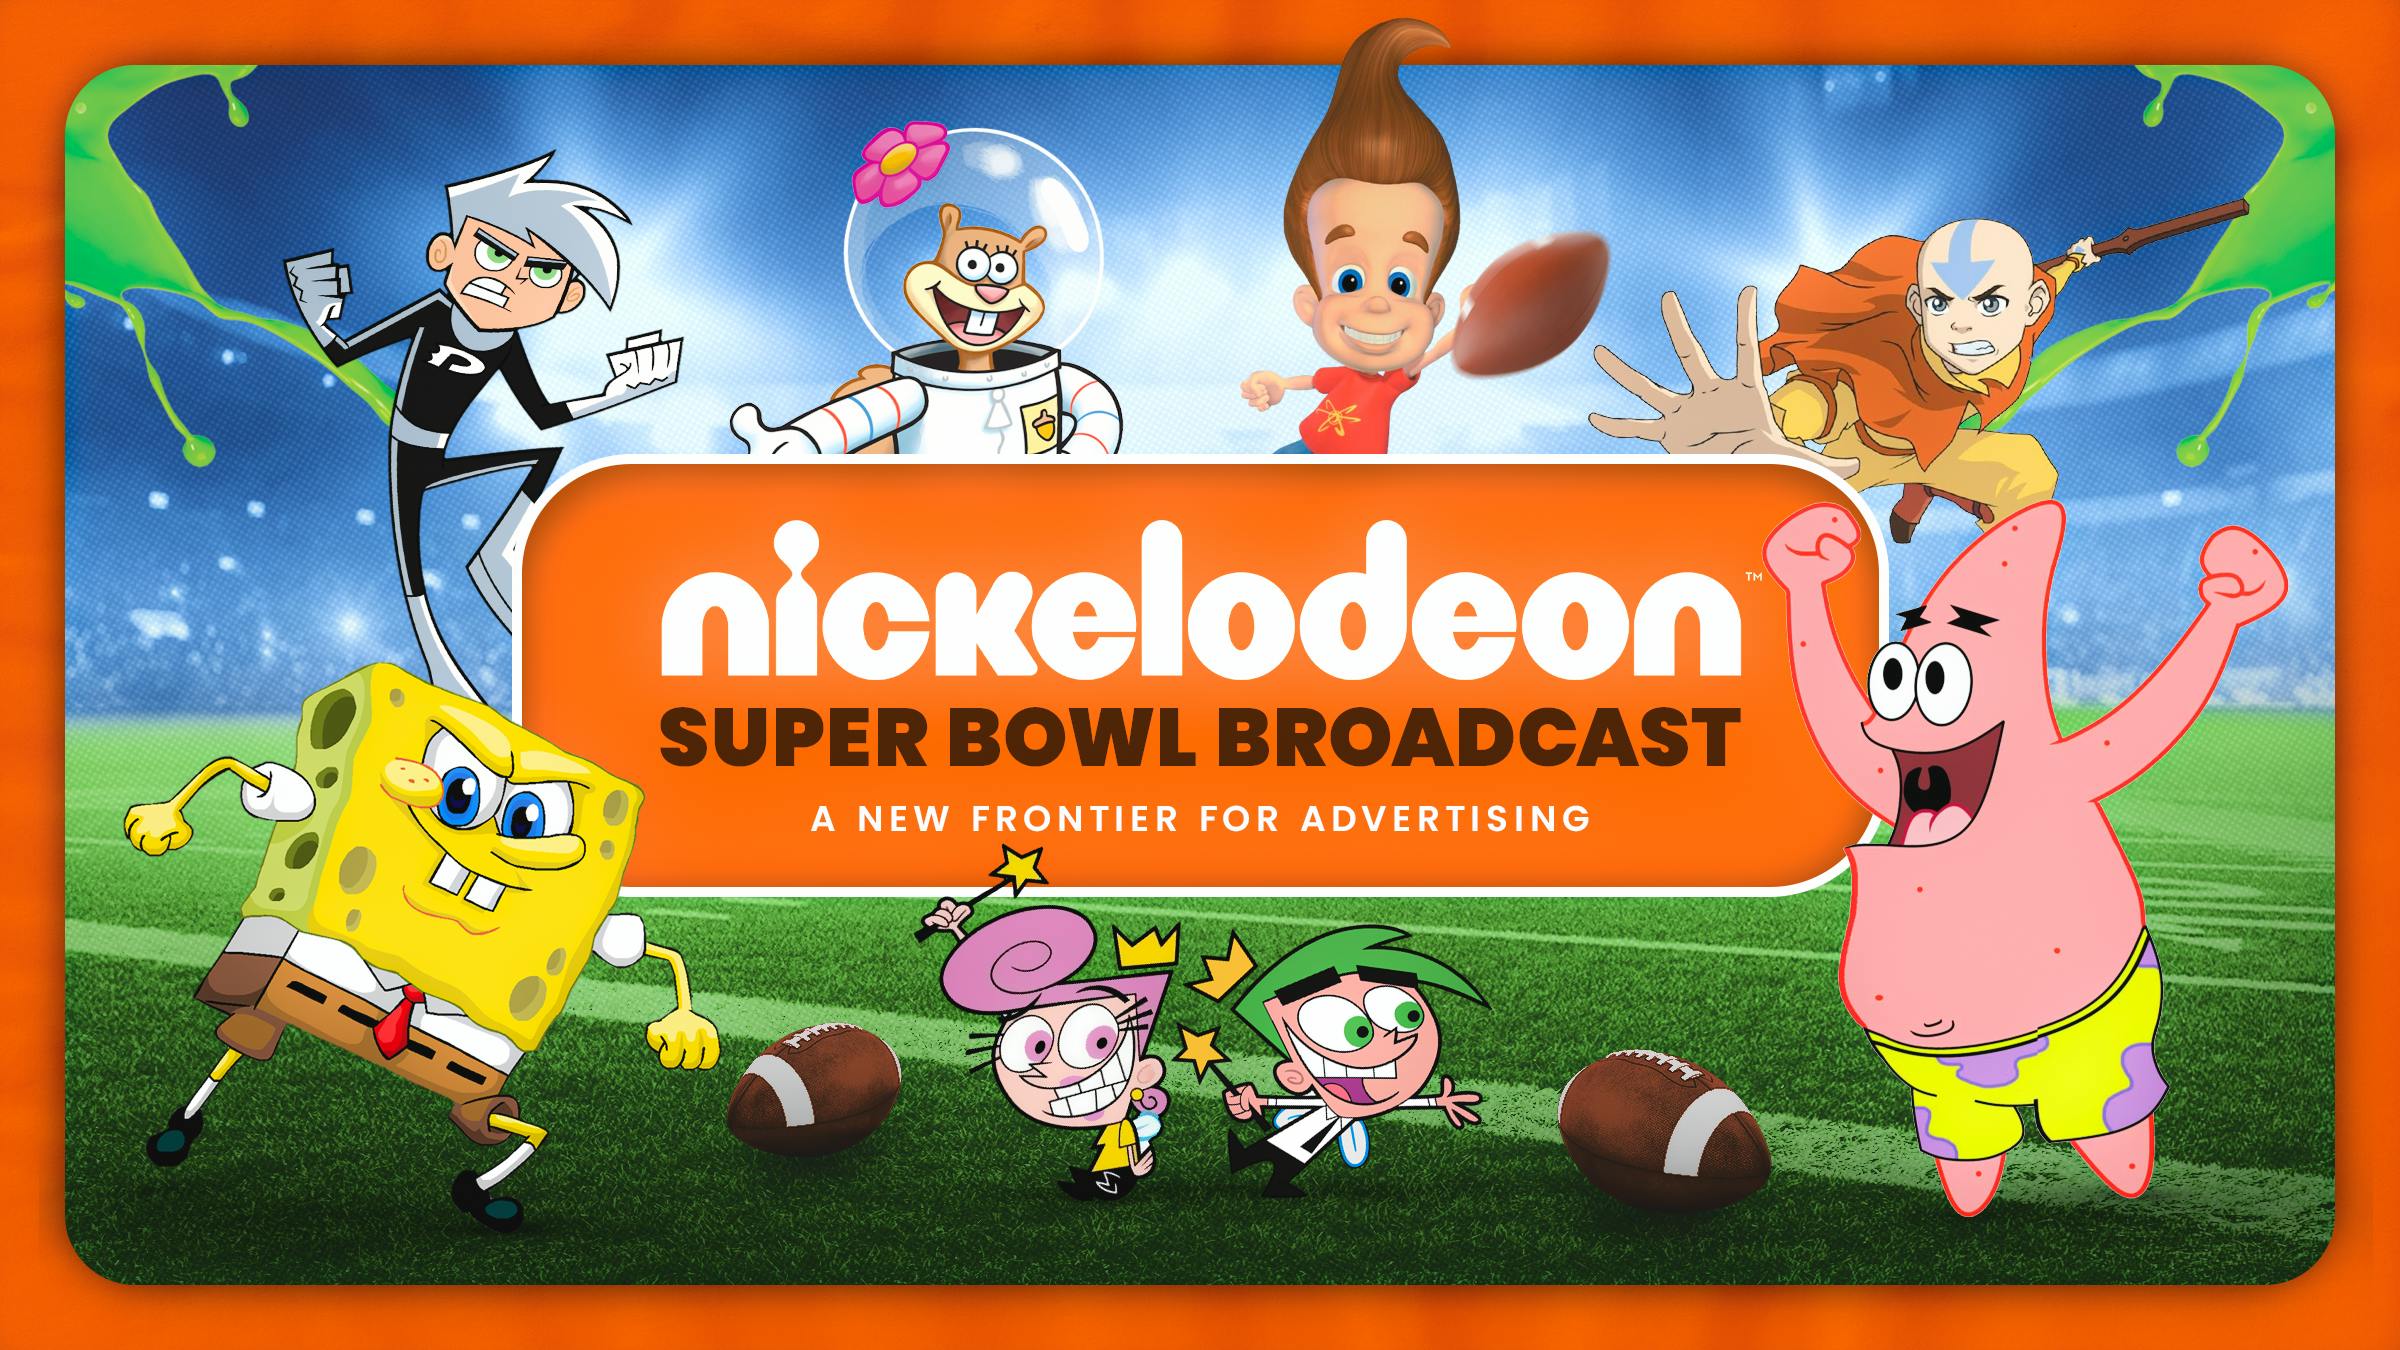 Nickelodeon will be hosting a kids-friendly telecast to educate young NFL fans.